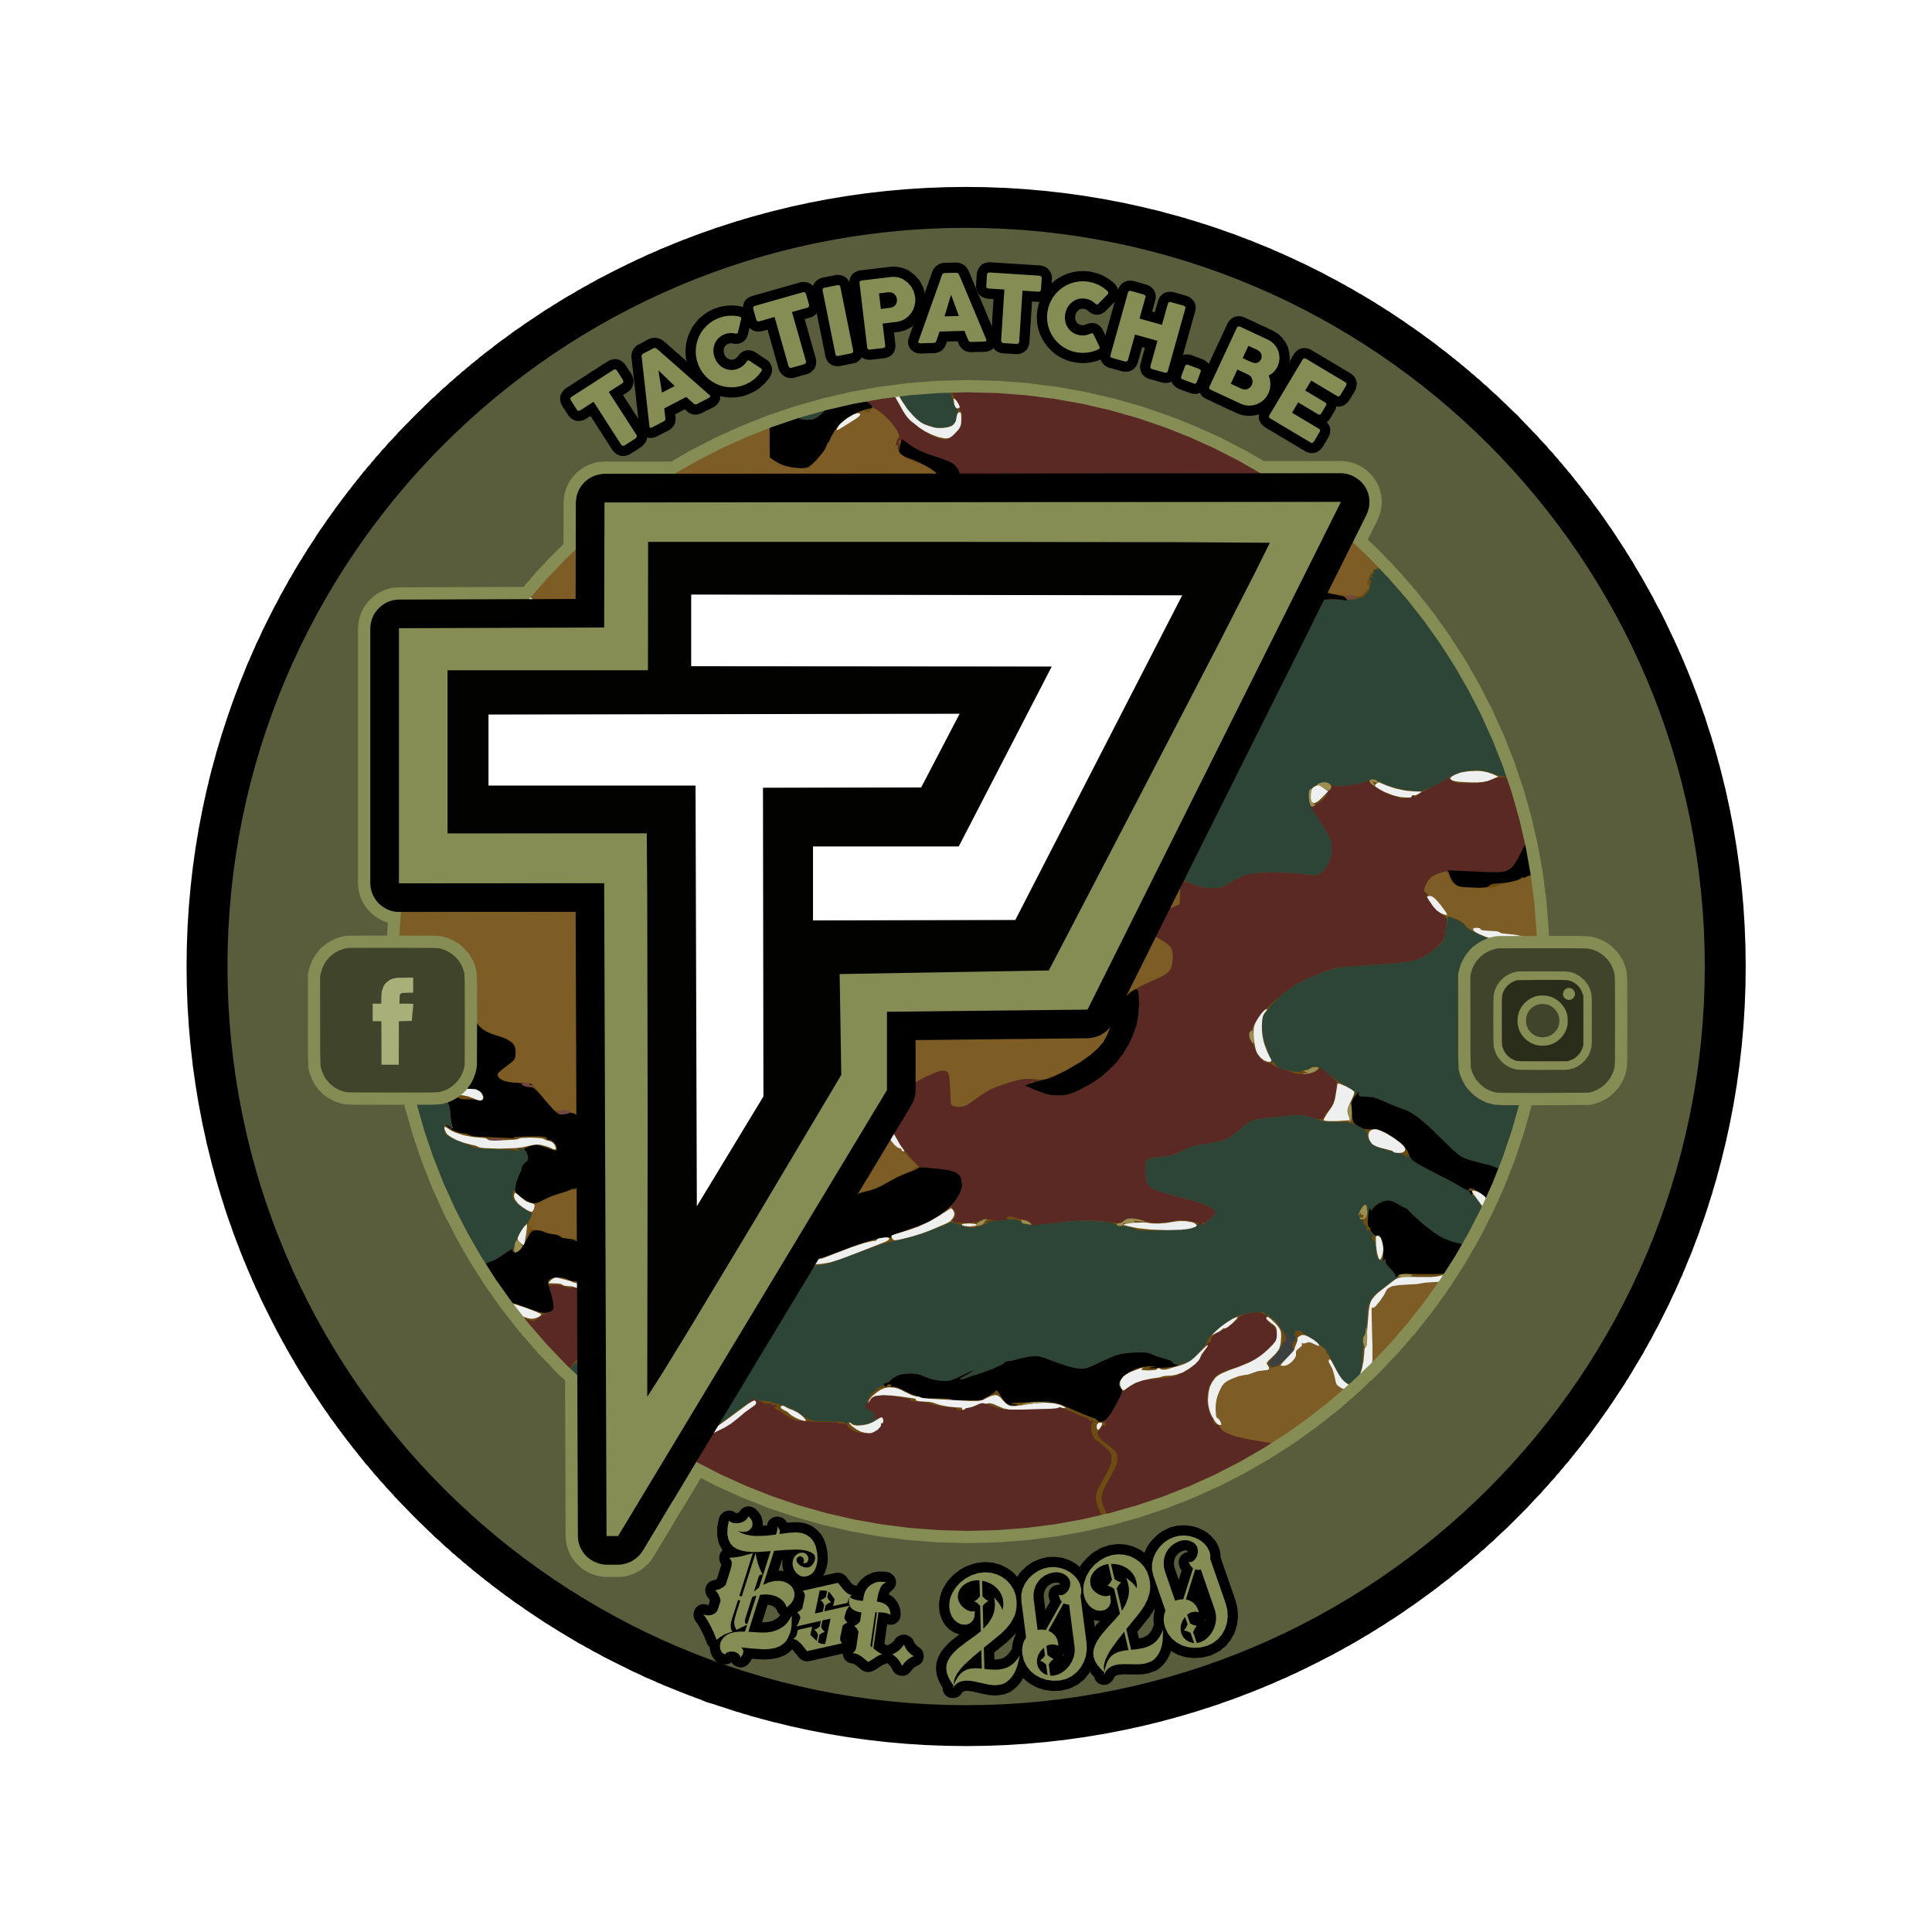 www.tactipatch.be